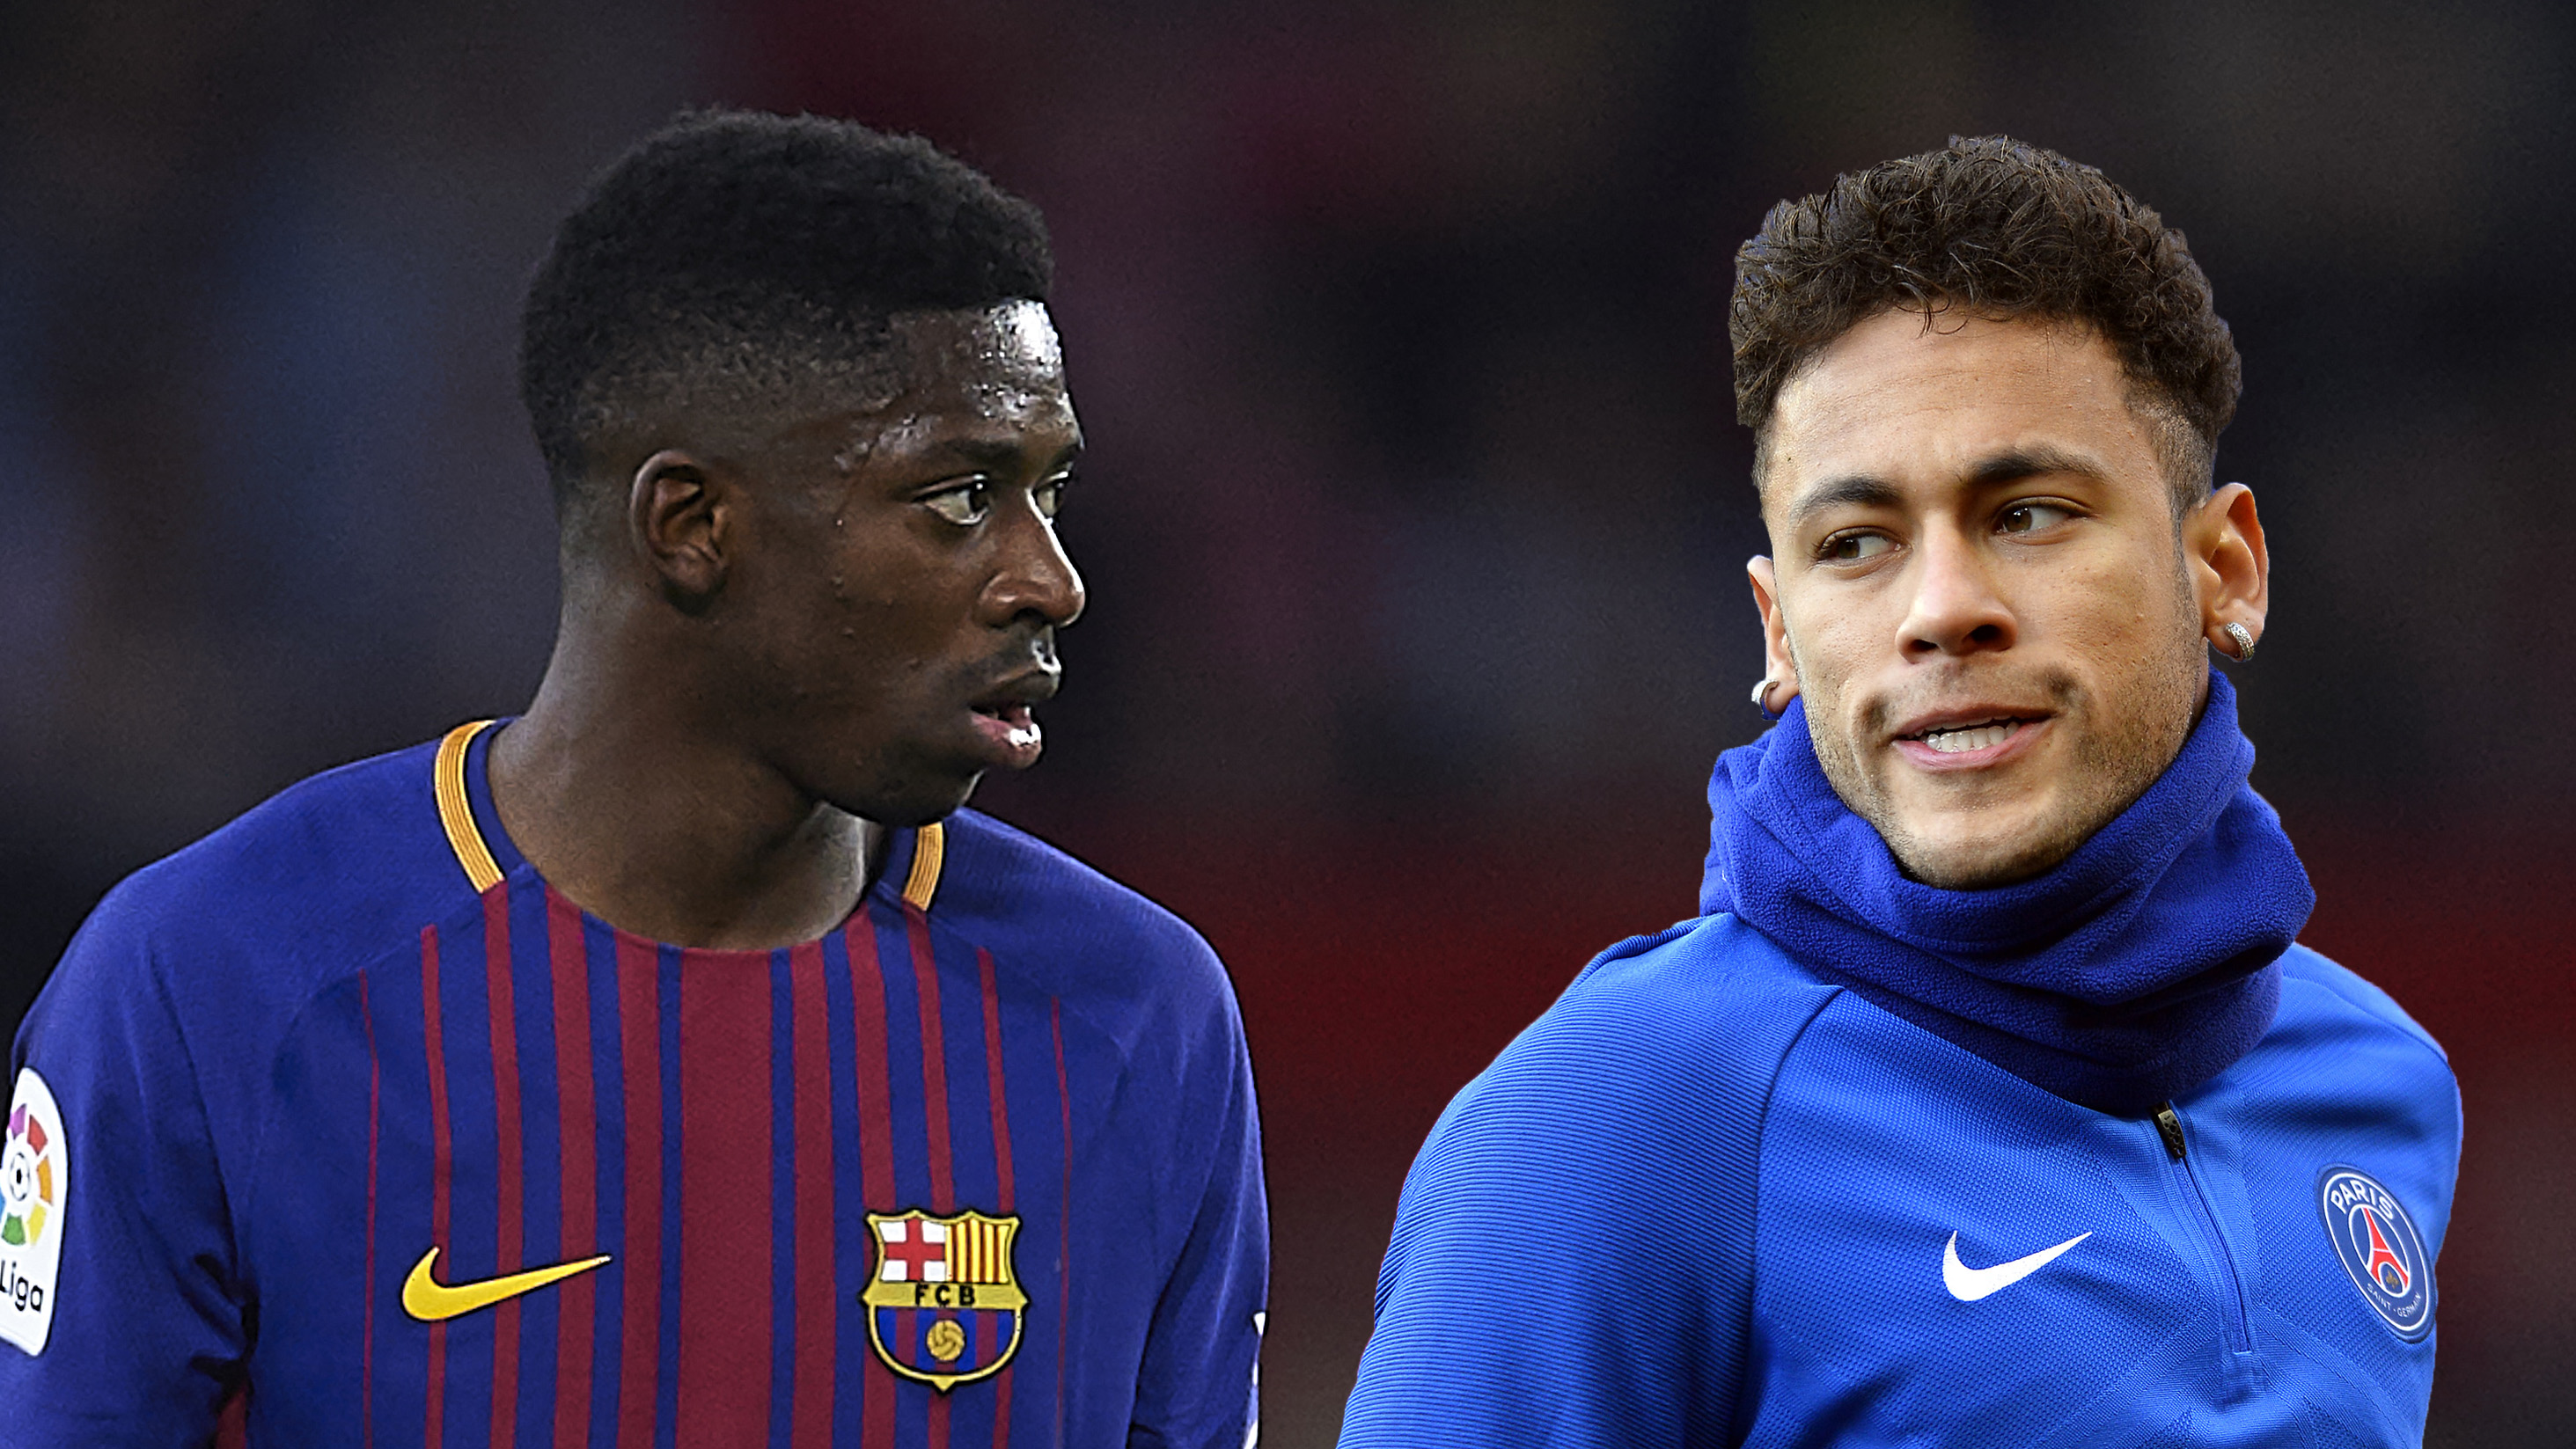 ‘Gaming addictions’, late for training – troublemaker Dembele self